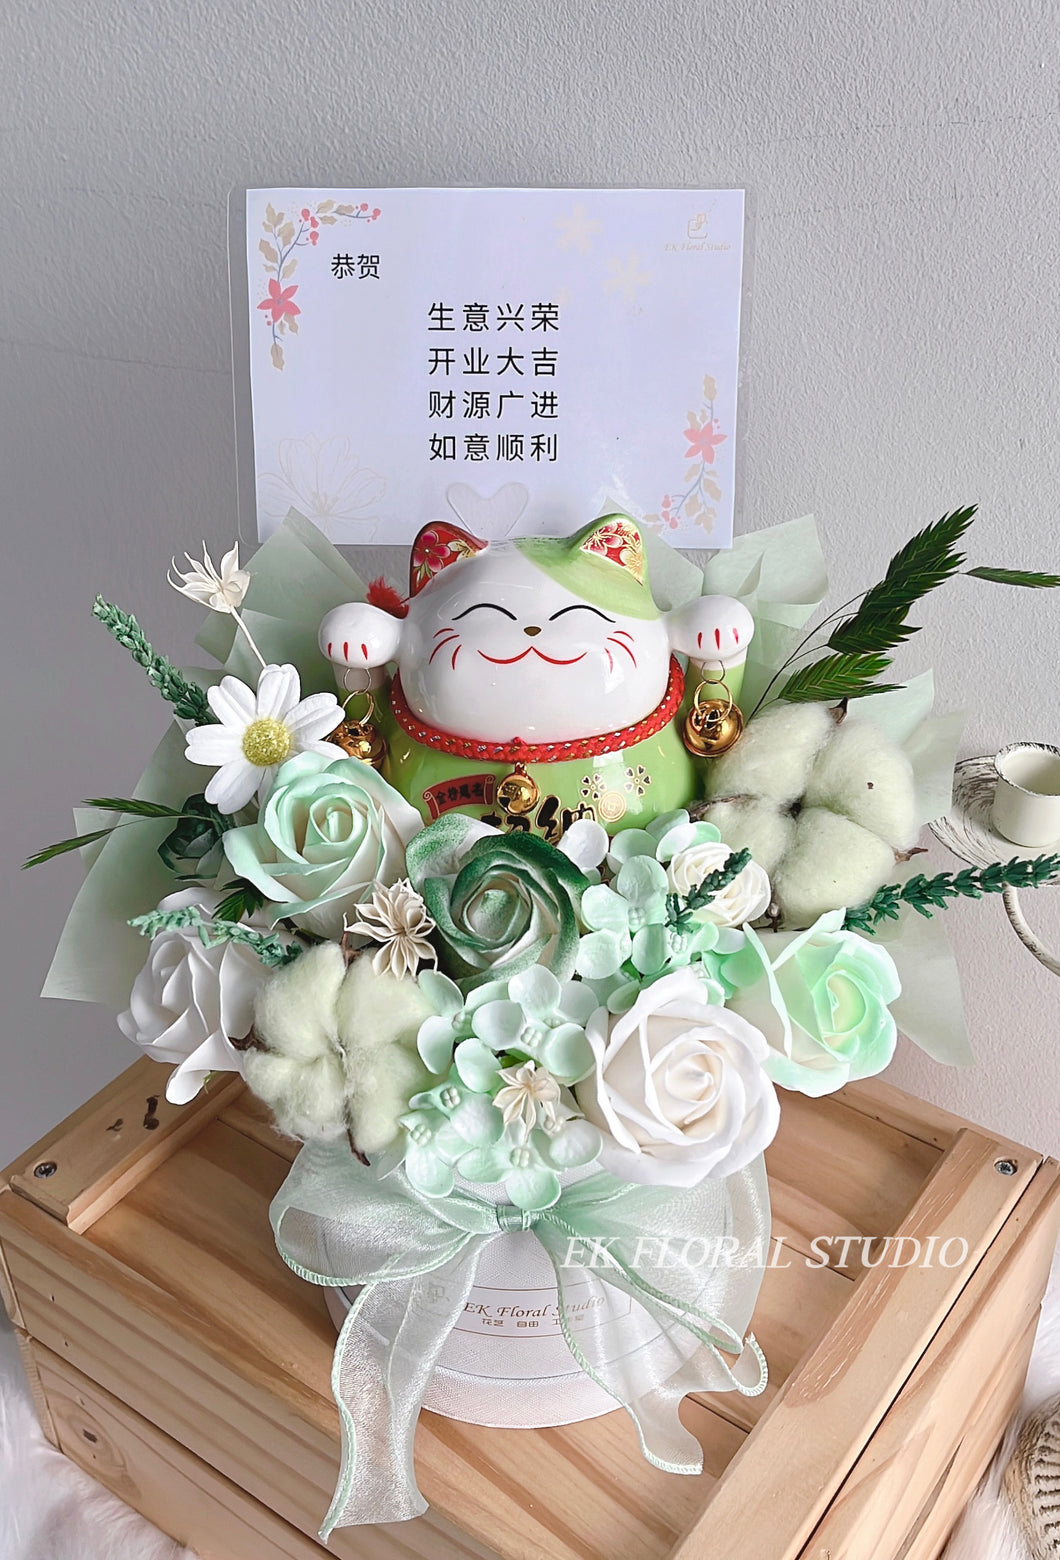 Forest Vibe Soap Flower Bucket with Fortune Cat 森系招财猫香皂开业花桶